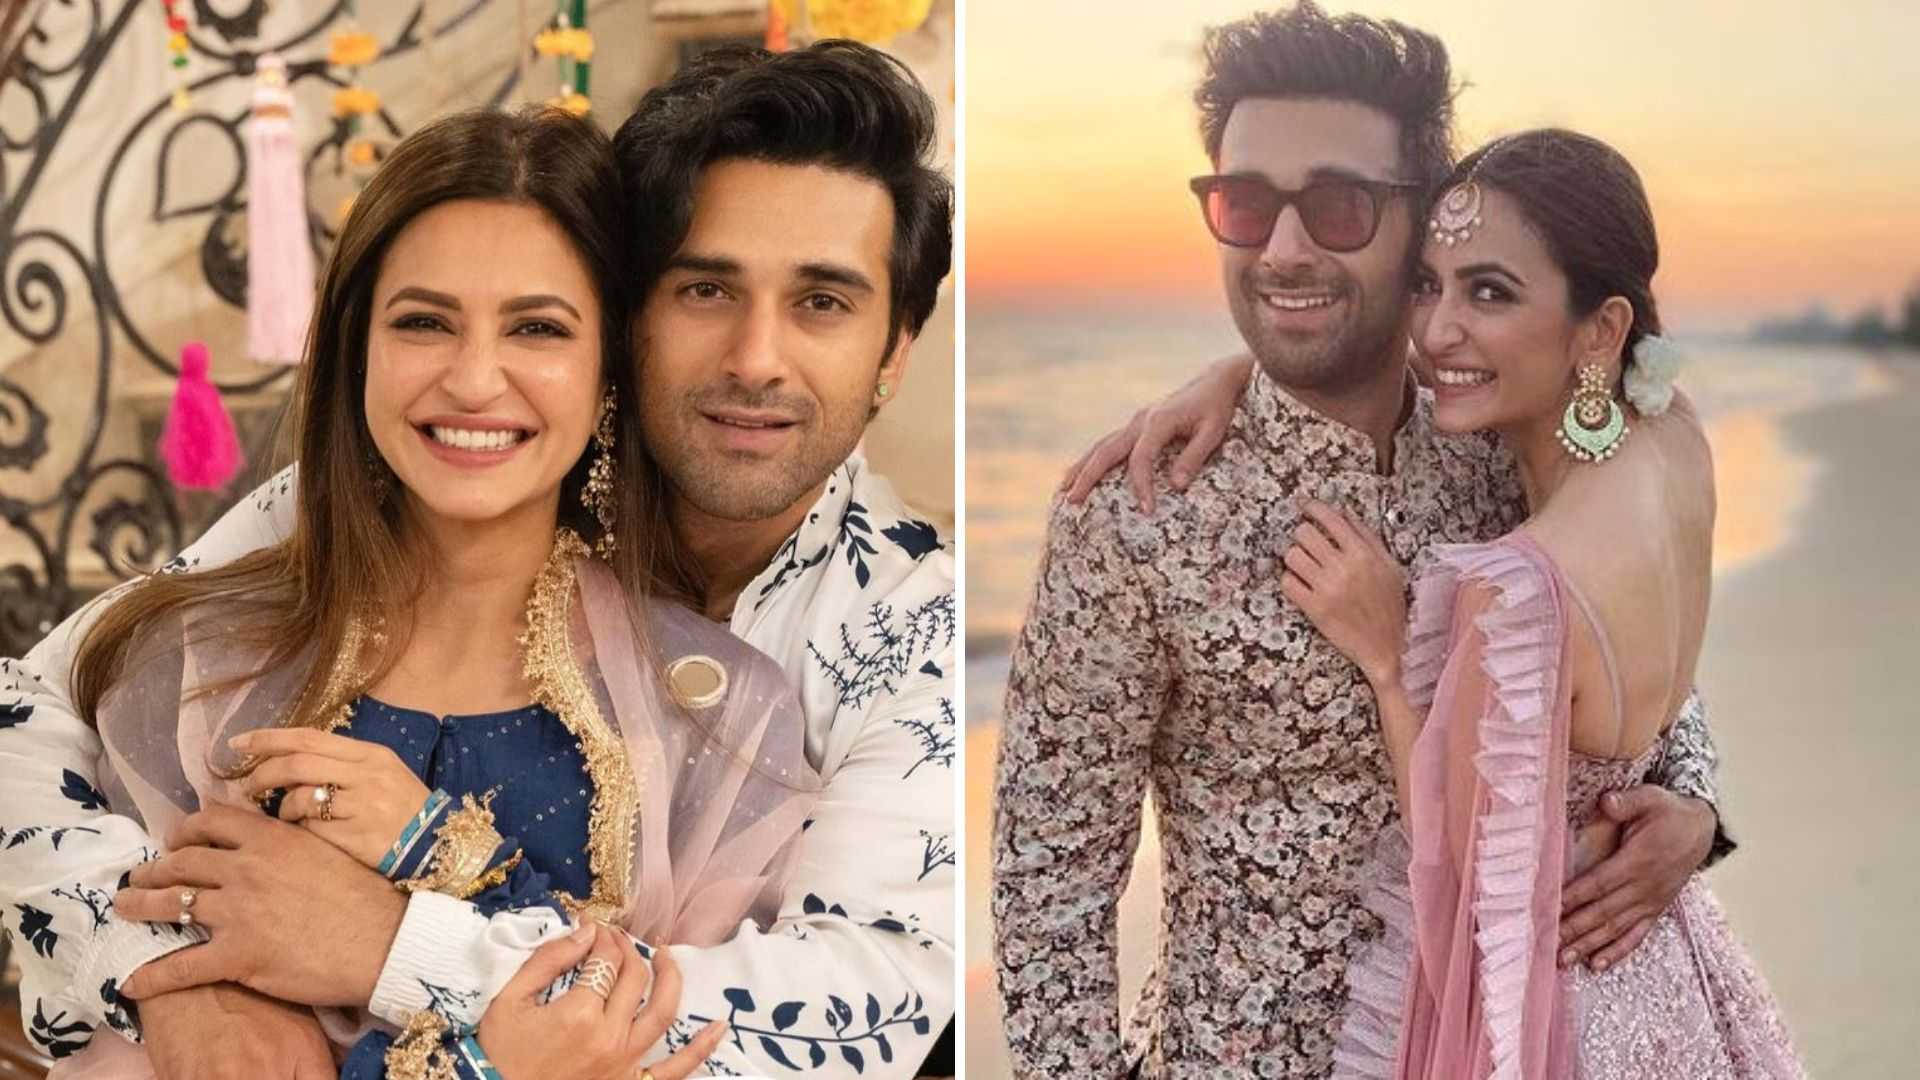 Pulkit Samrat and Kriti Kharbanda get engaged in an intimate ceremony, delightful pictures go viral